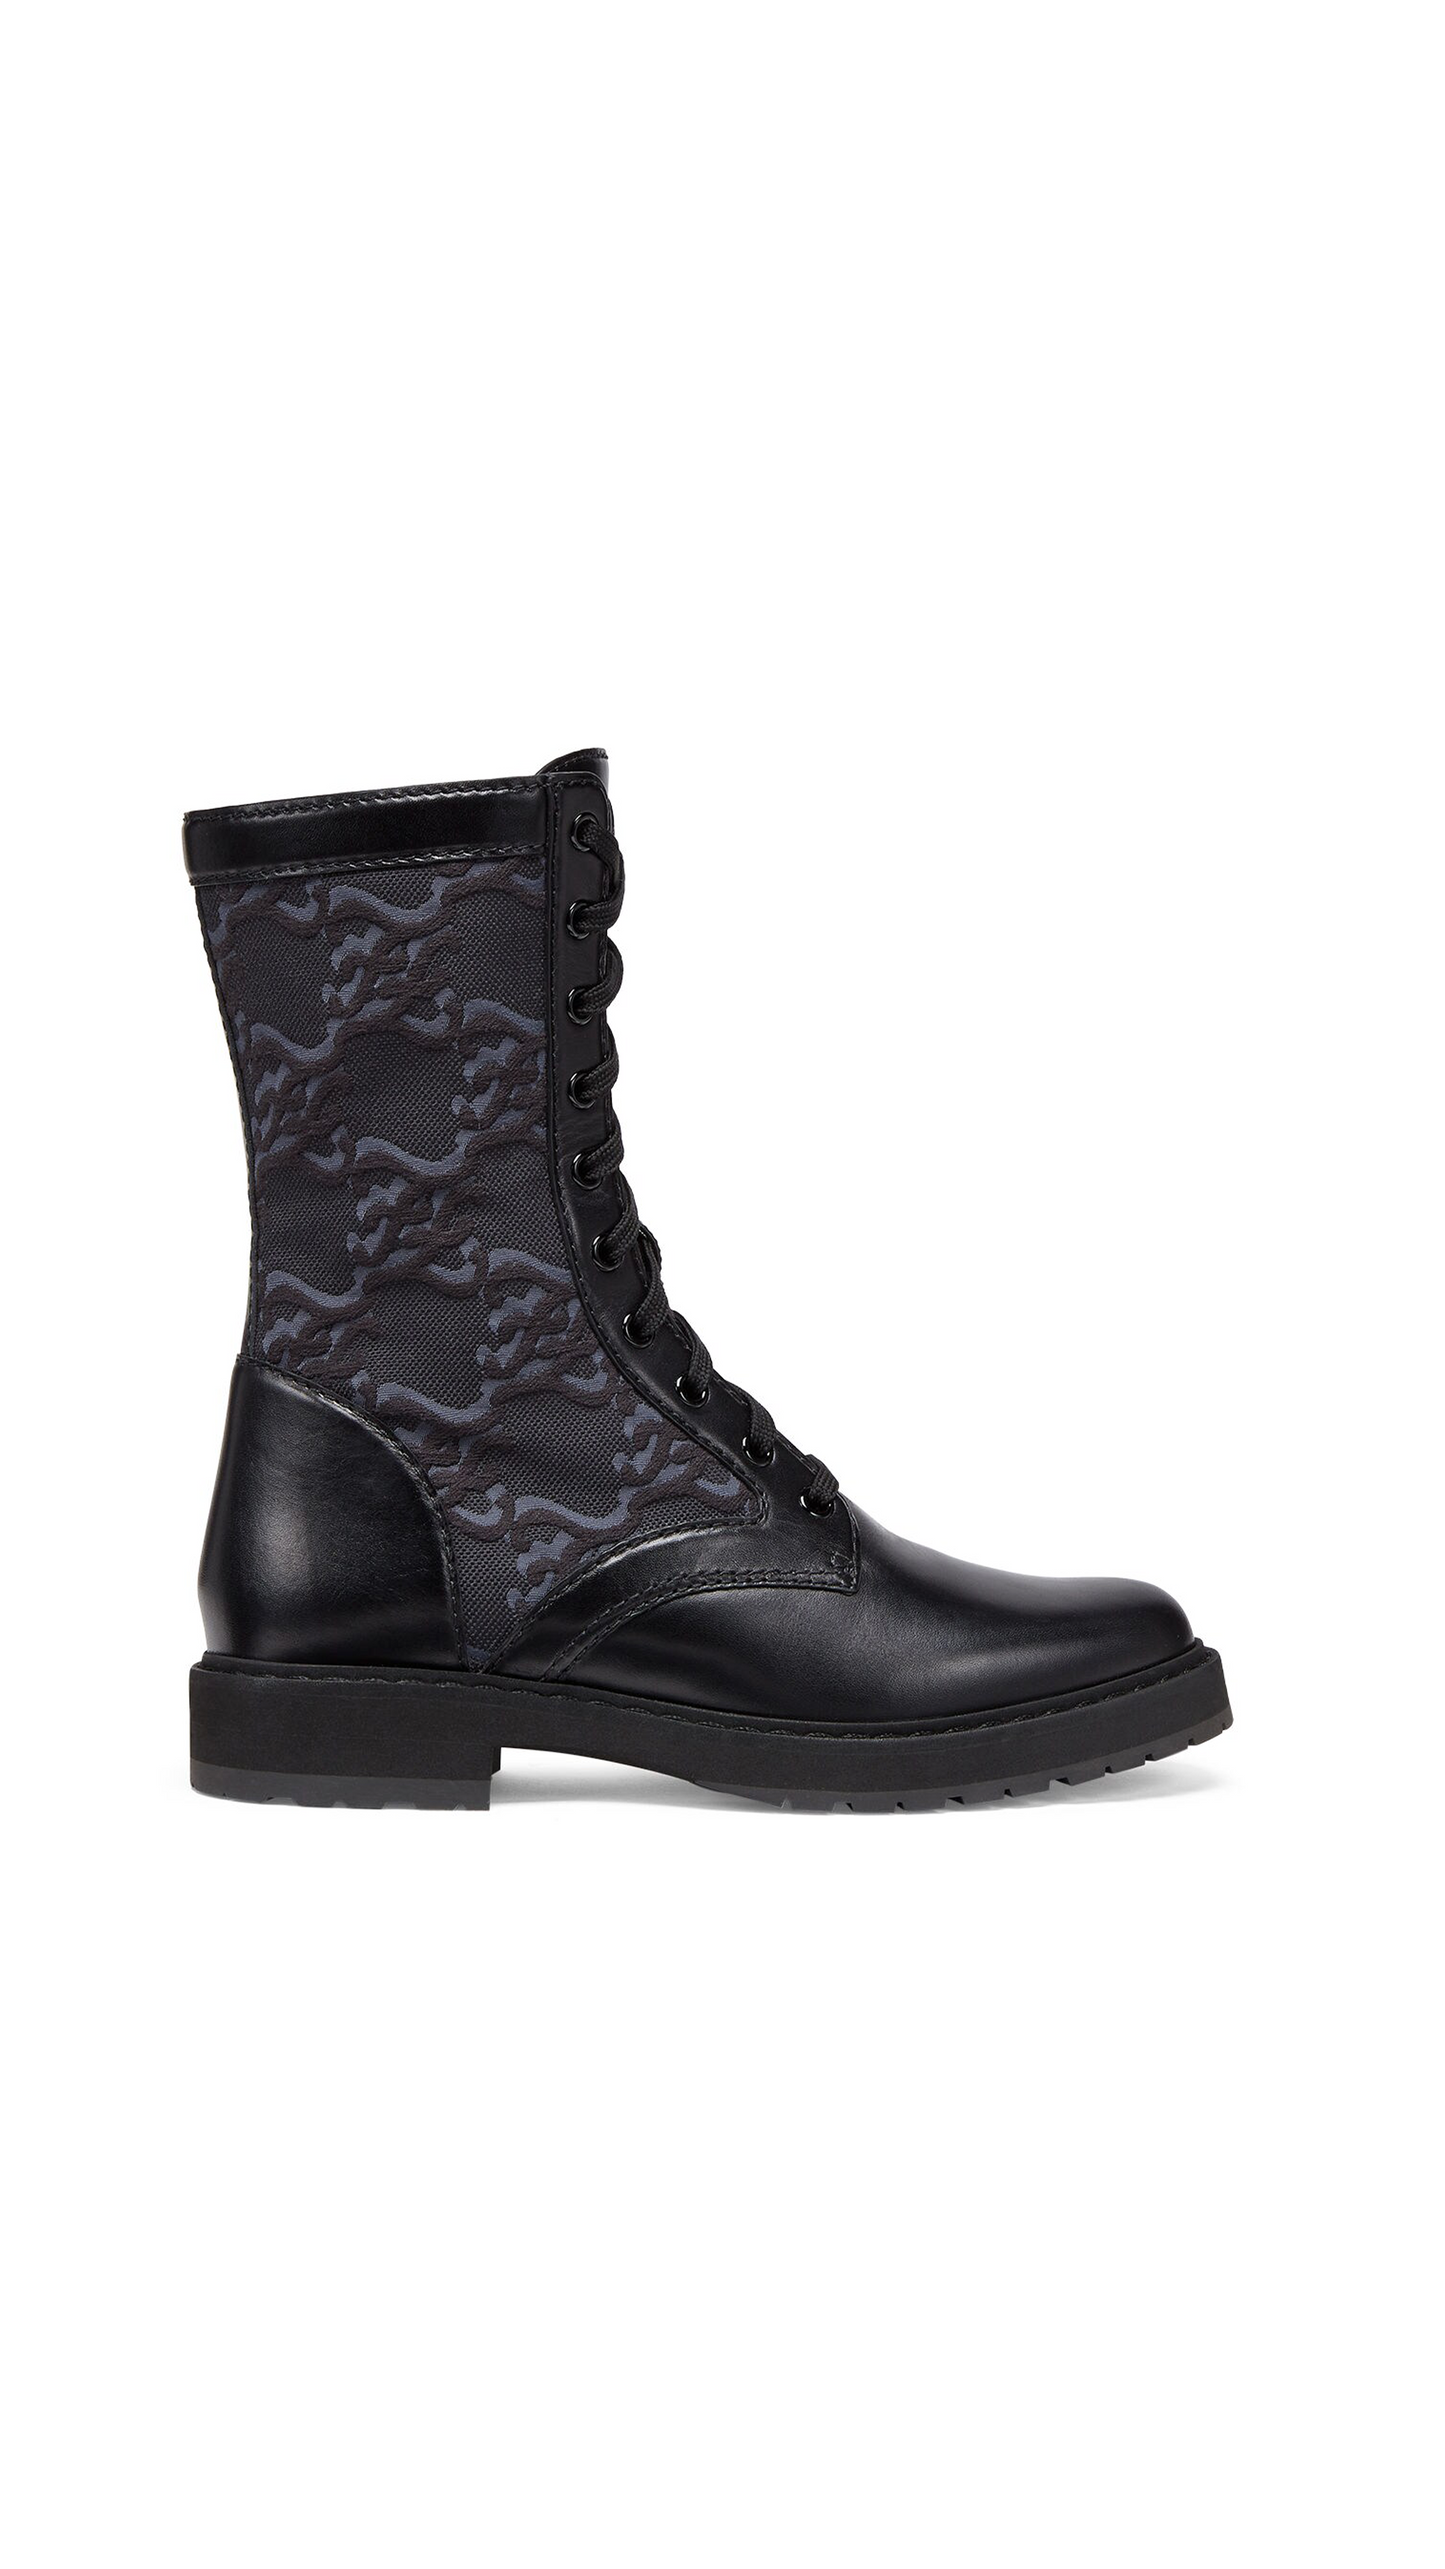 Leather Biker Boots With Stretch Fabric - Black